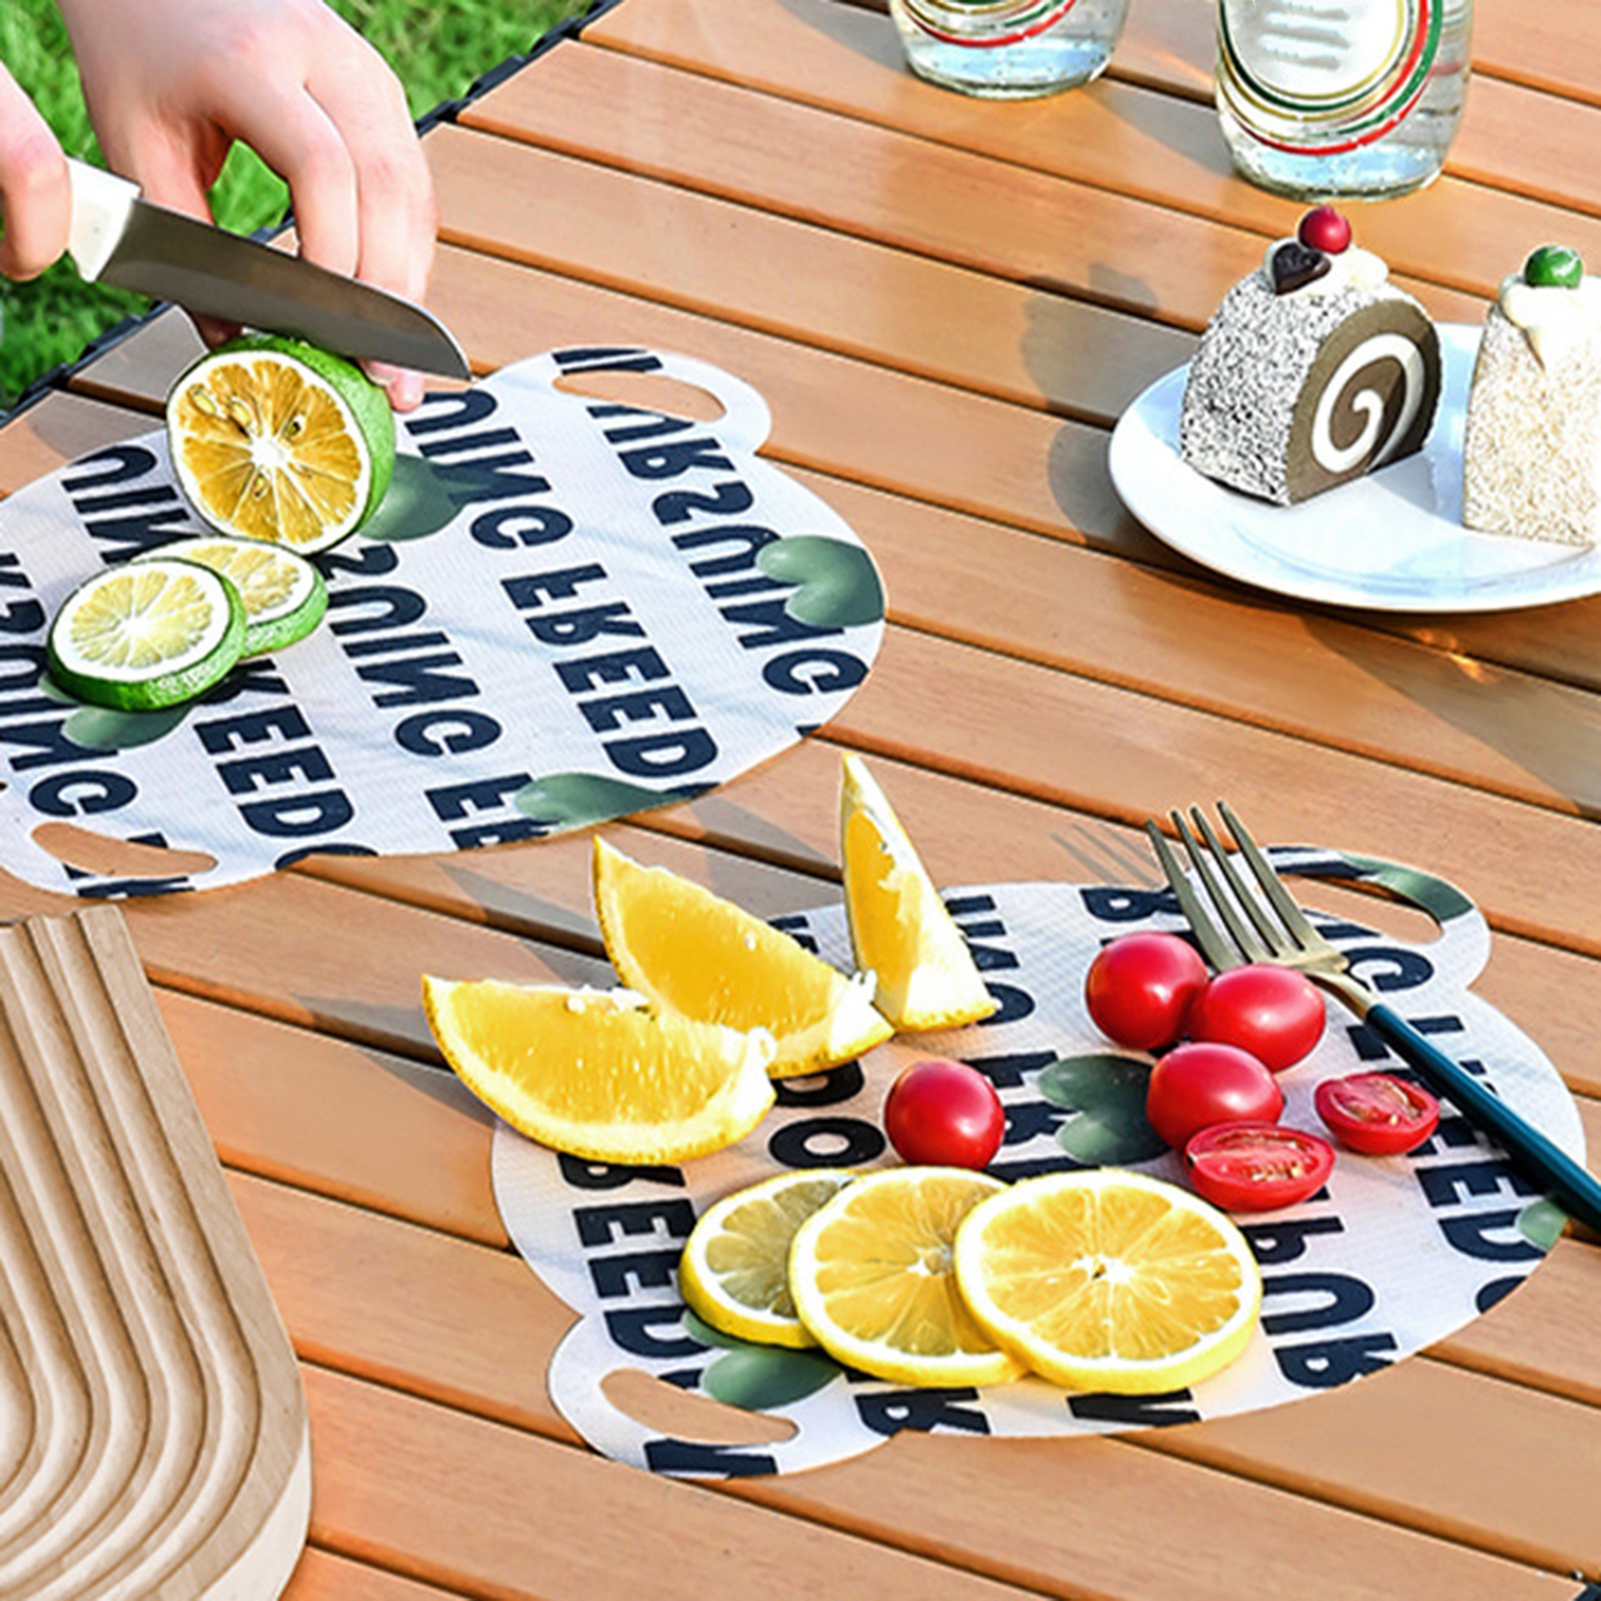 Waroomhouse Kitchen Cutting Board Mat 5pcs Chop Board Pads with Handle  Heart Letter Print Disposable Fruit Cutting Mats Flexible Vegetable Meat